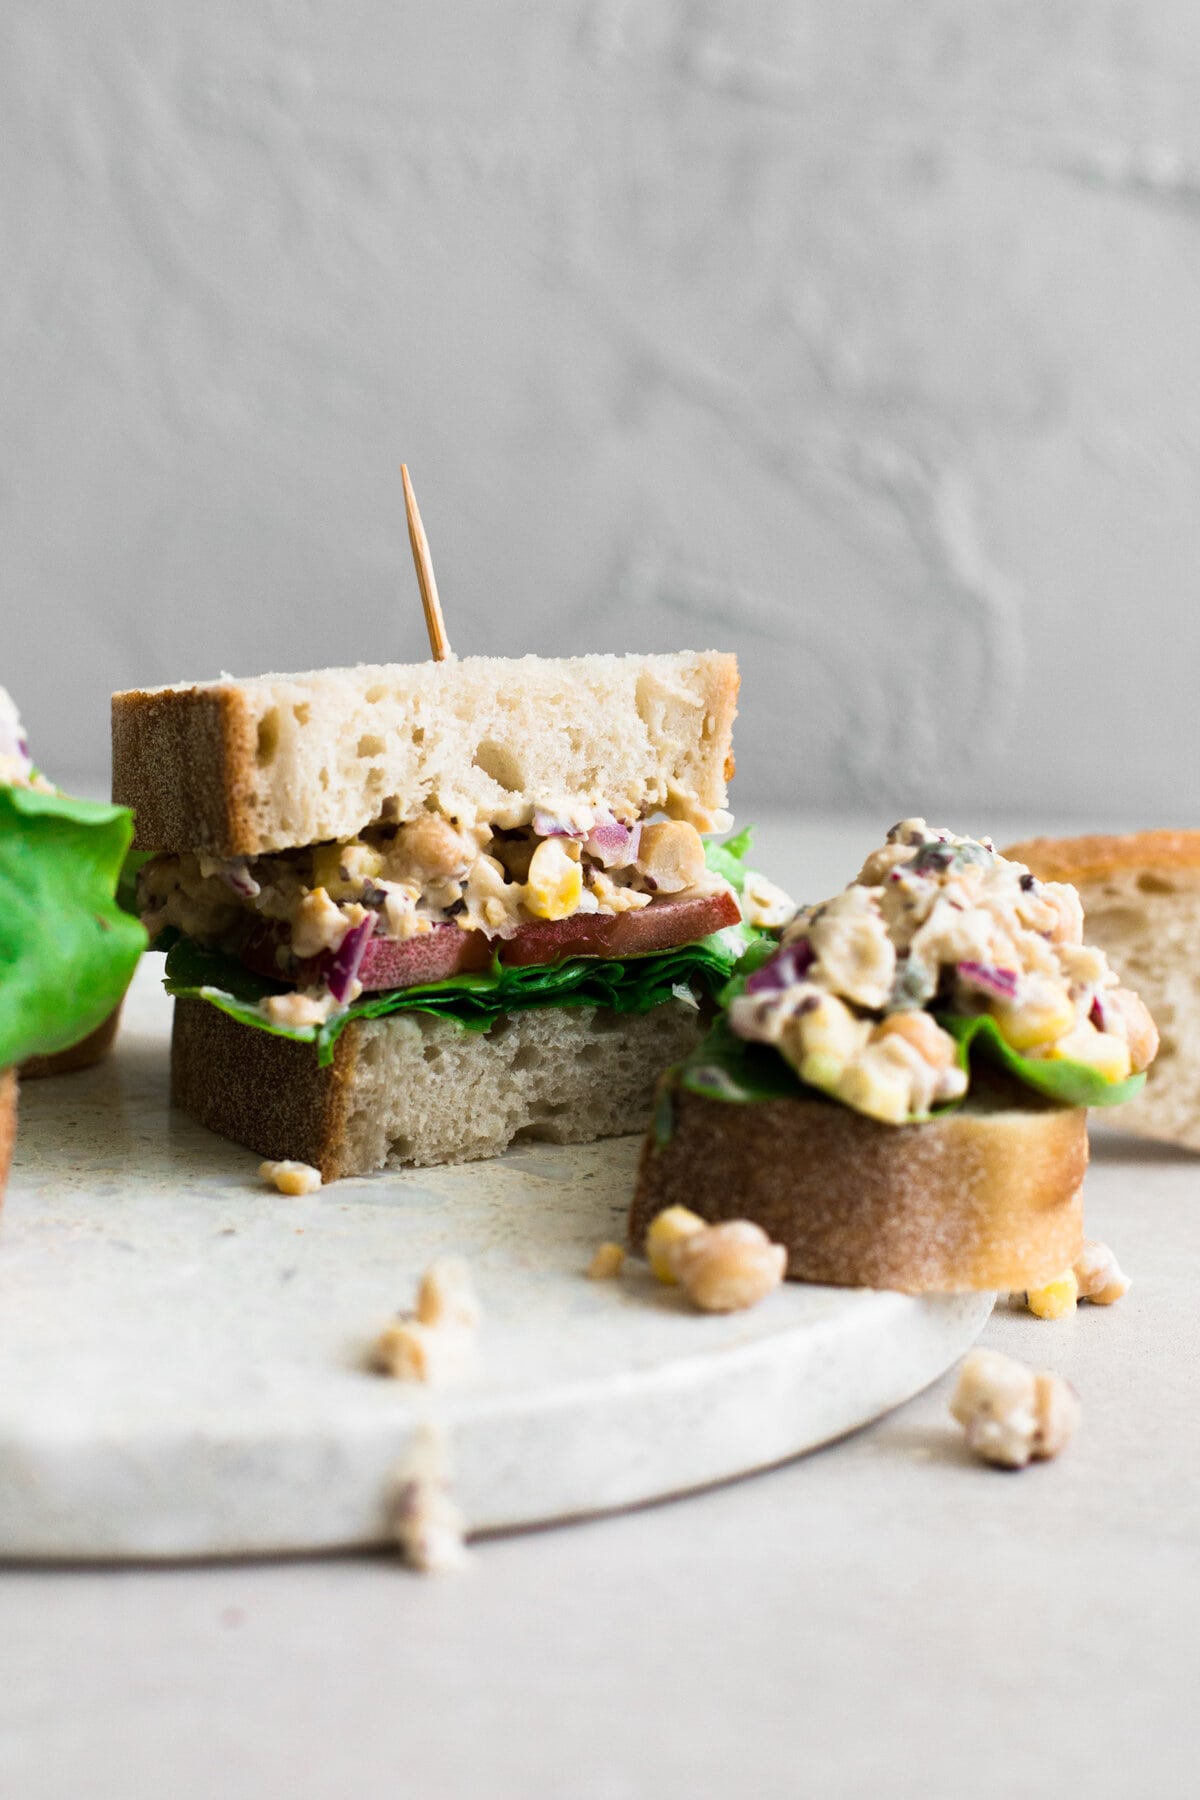 The Best Vegan Tuna Salad ever! Made with Chickpeas, Vegan Mayo, Dill, Capers, Onion and a secret ingredient! Ready in under 10 minutes. #tunasalad #plantbased #chickpeas #sandwich #healthy #vegetarian #tunamayo #tunasandwich #fauxtuna